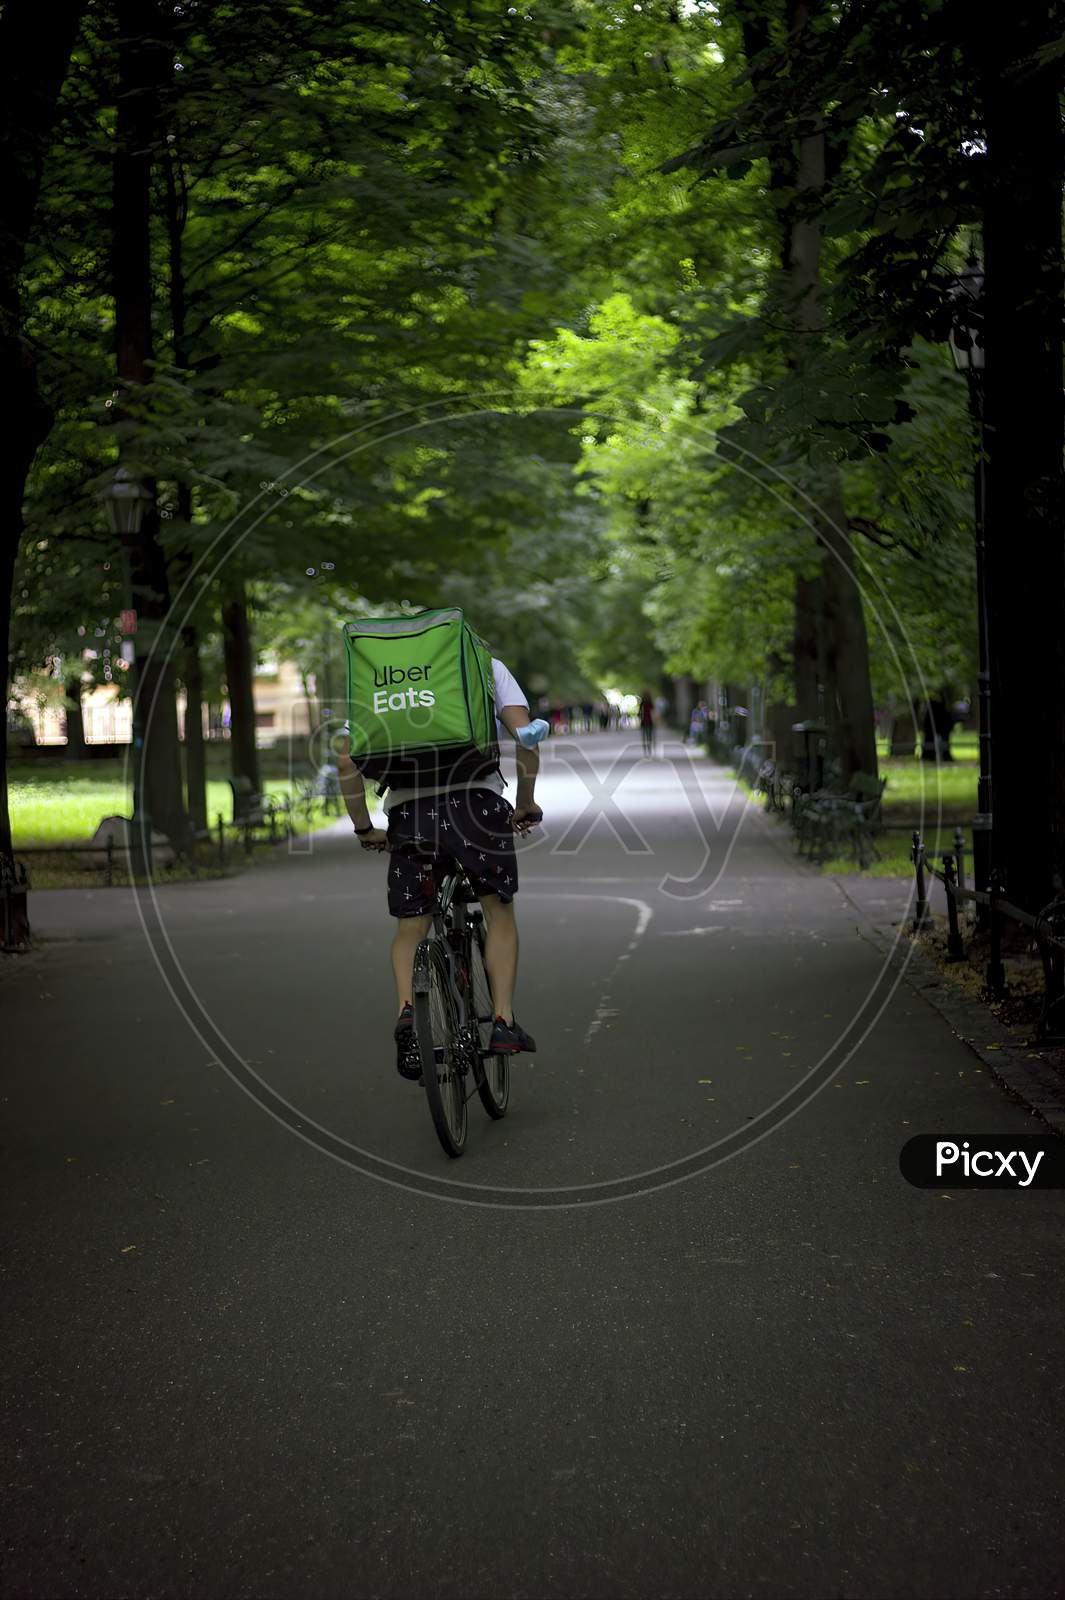 Krakow, Poland - August 01, 2021: A Delivery Man In A Bicycle Riding Through A Street In Order To Delivering Food In A Huge Bag Pack